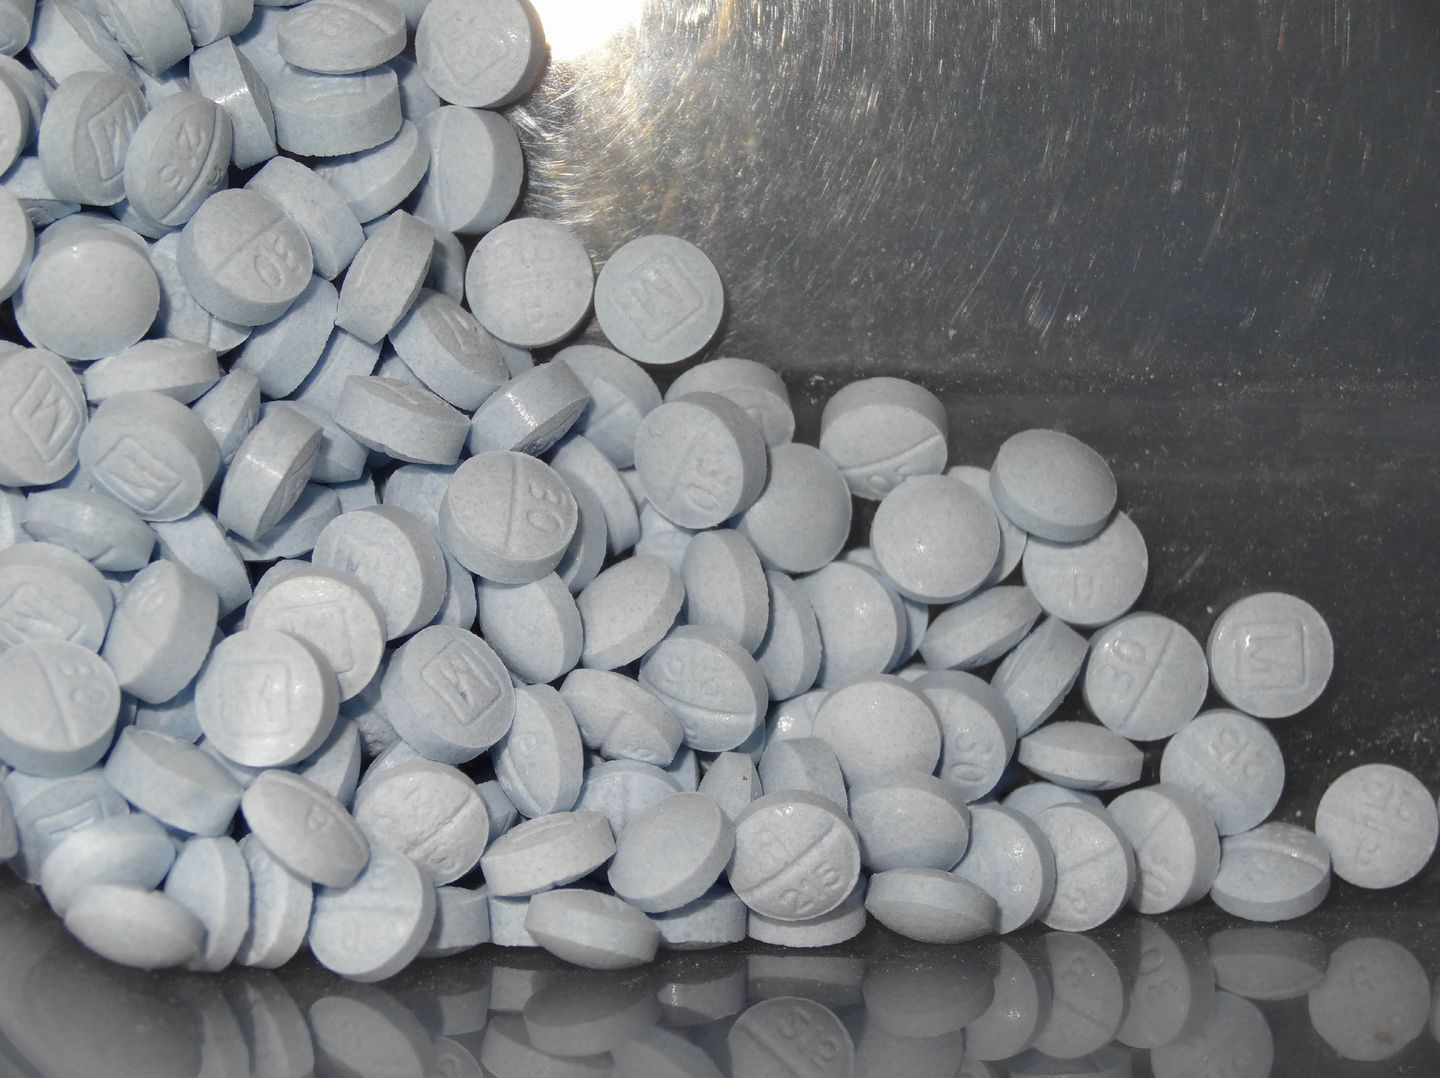 U.S. warns about fake, dangerous pills being sold in Mexico